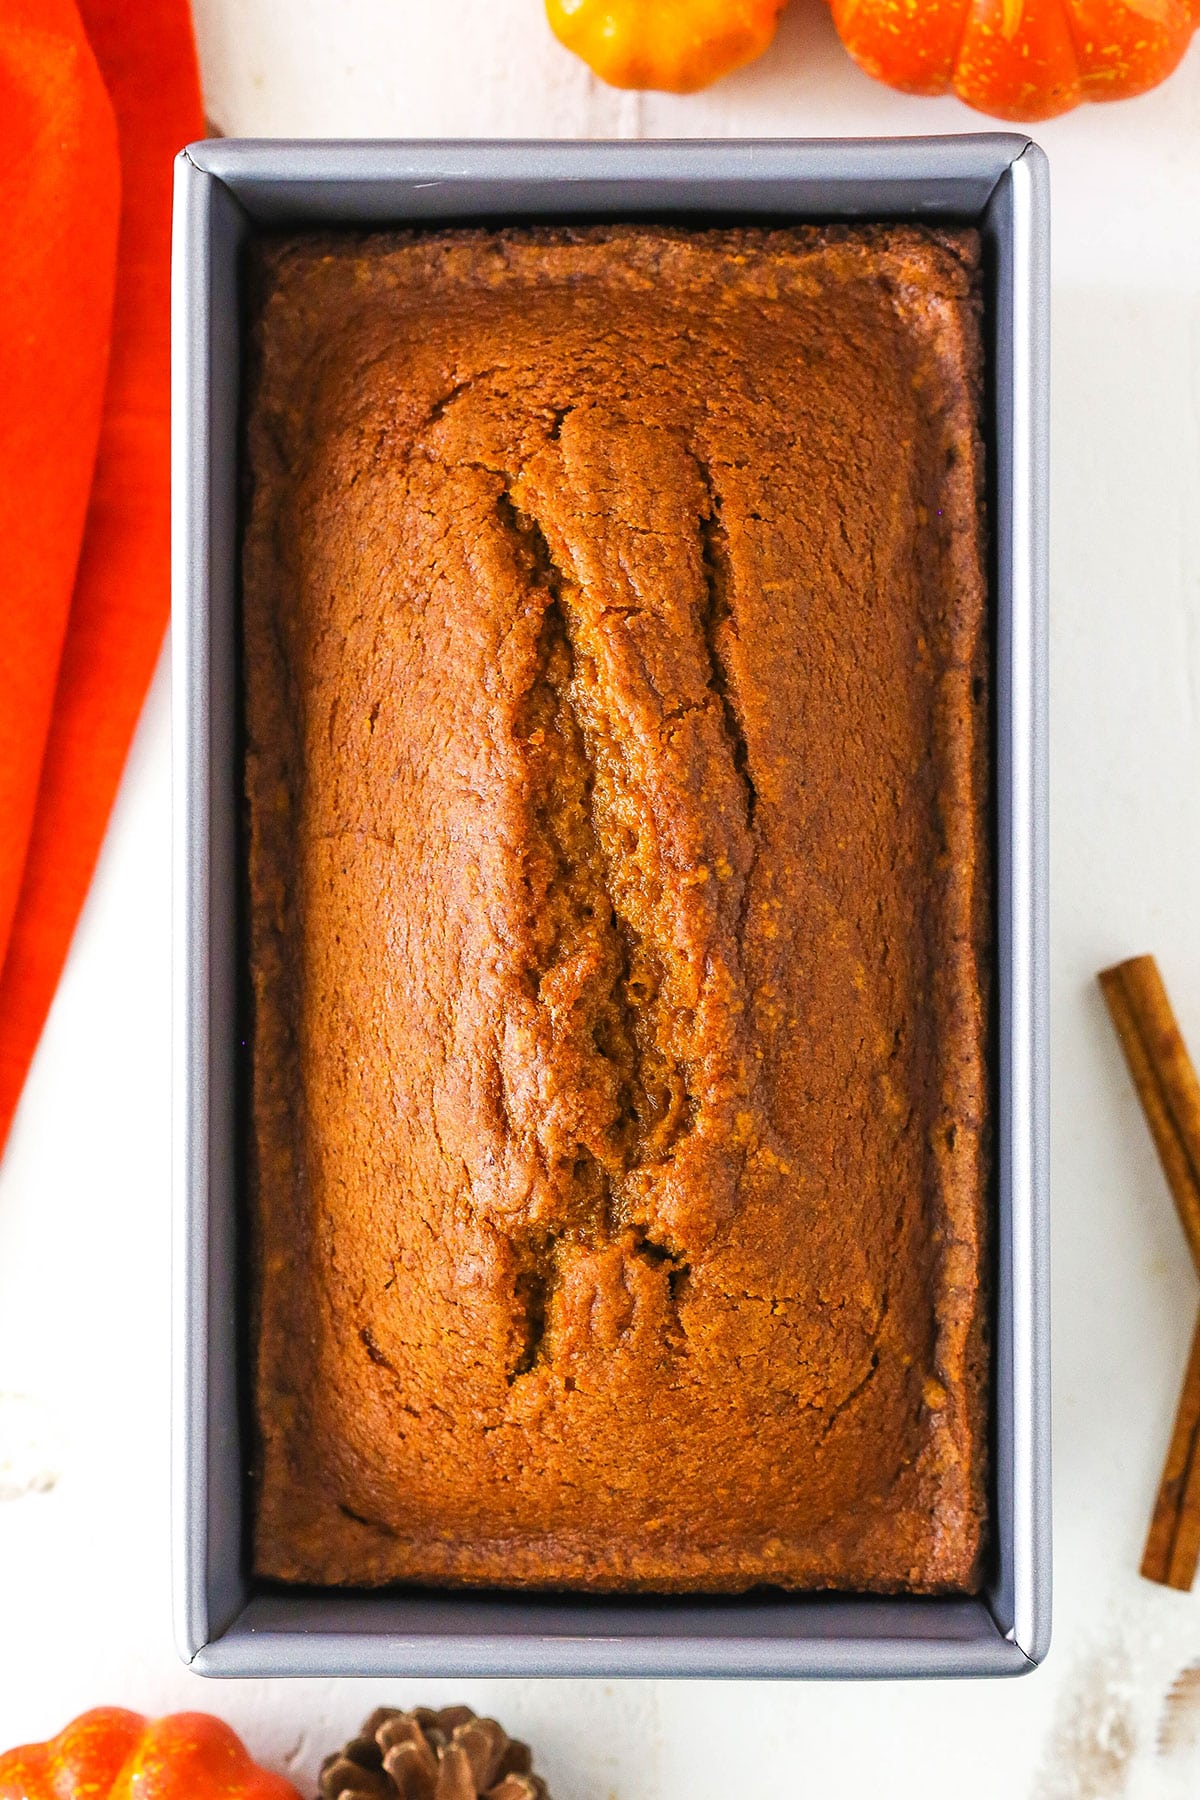 Overhead view of a full loaf of Pumpkin Bread in a metal baking pan on a white table